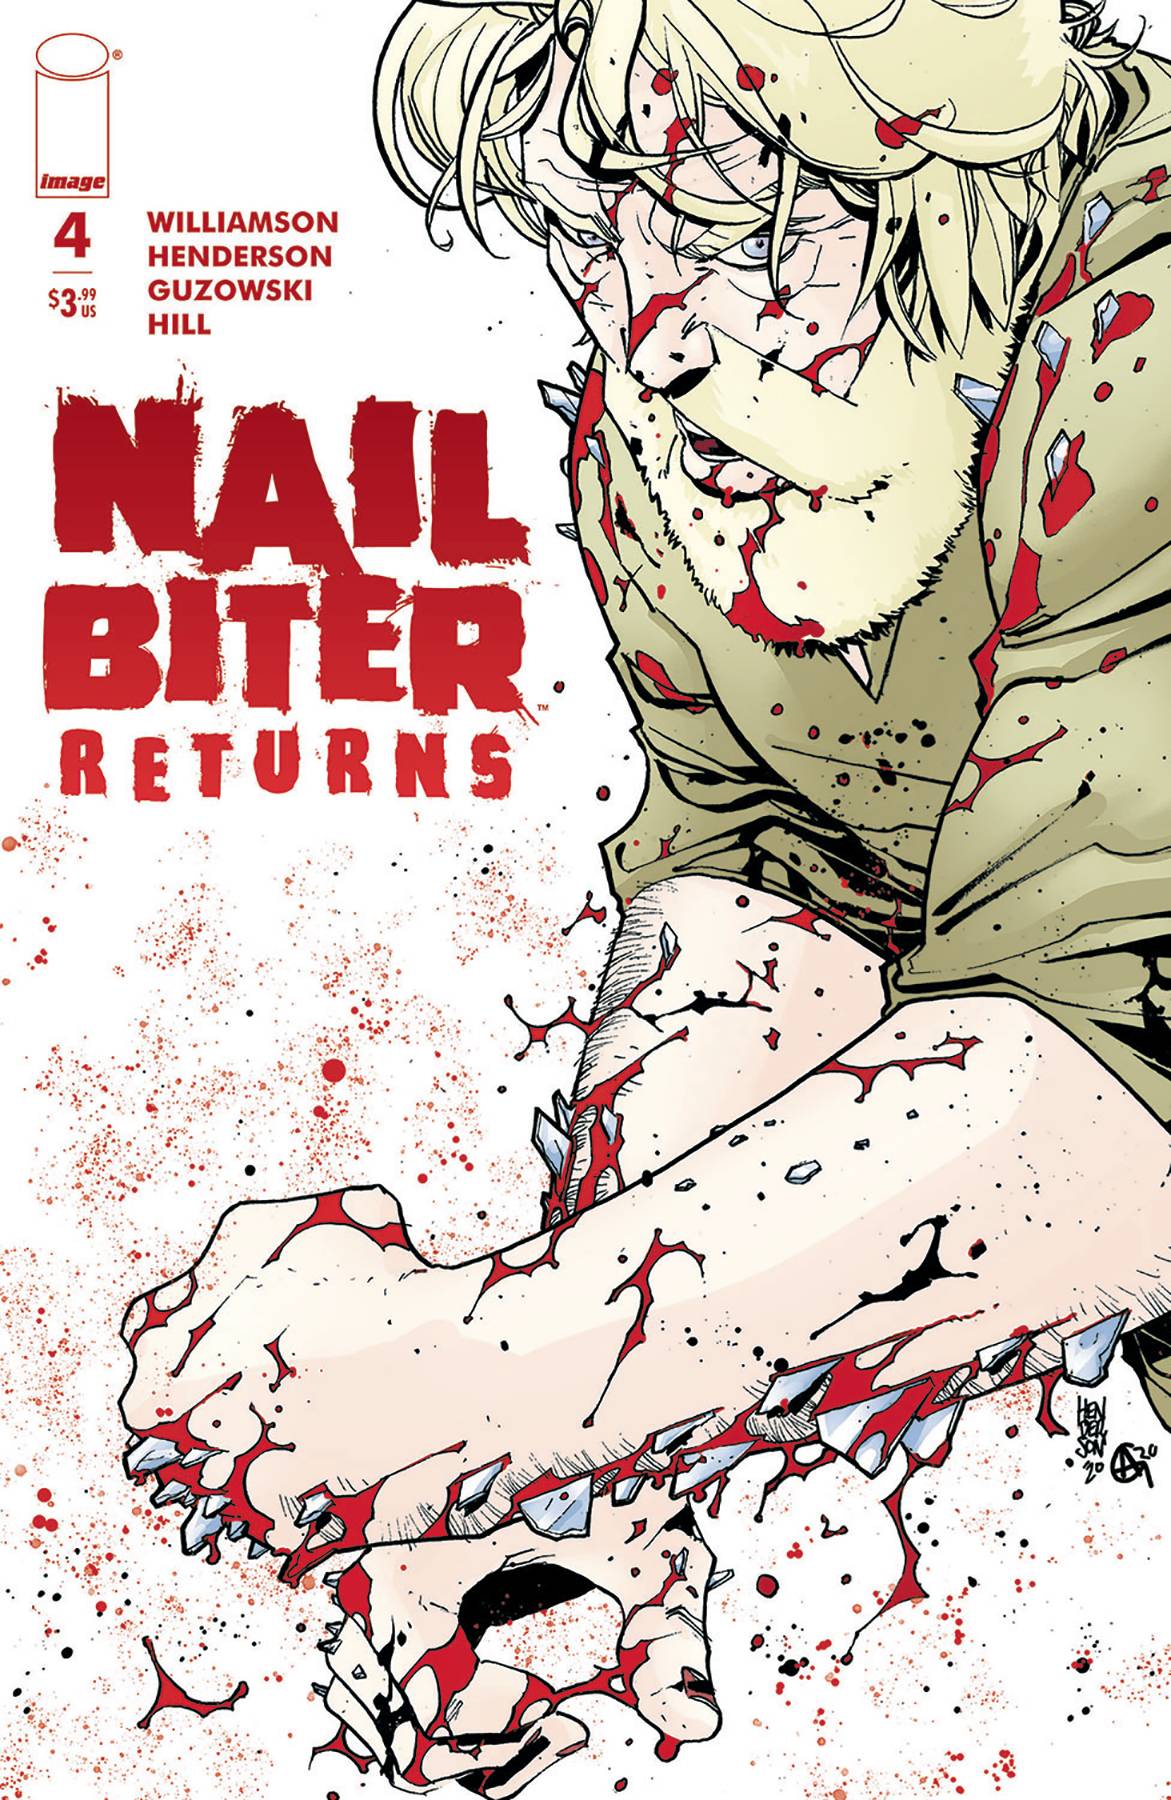 NAILBITER TP VOL 01 THERE WILL BE BLOOD (AUG140593) (MR)